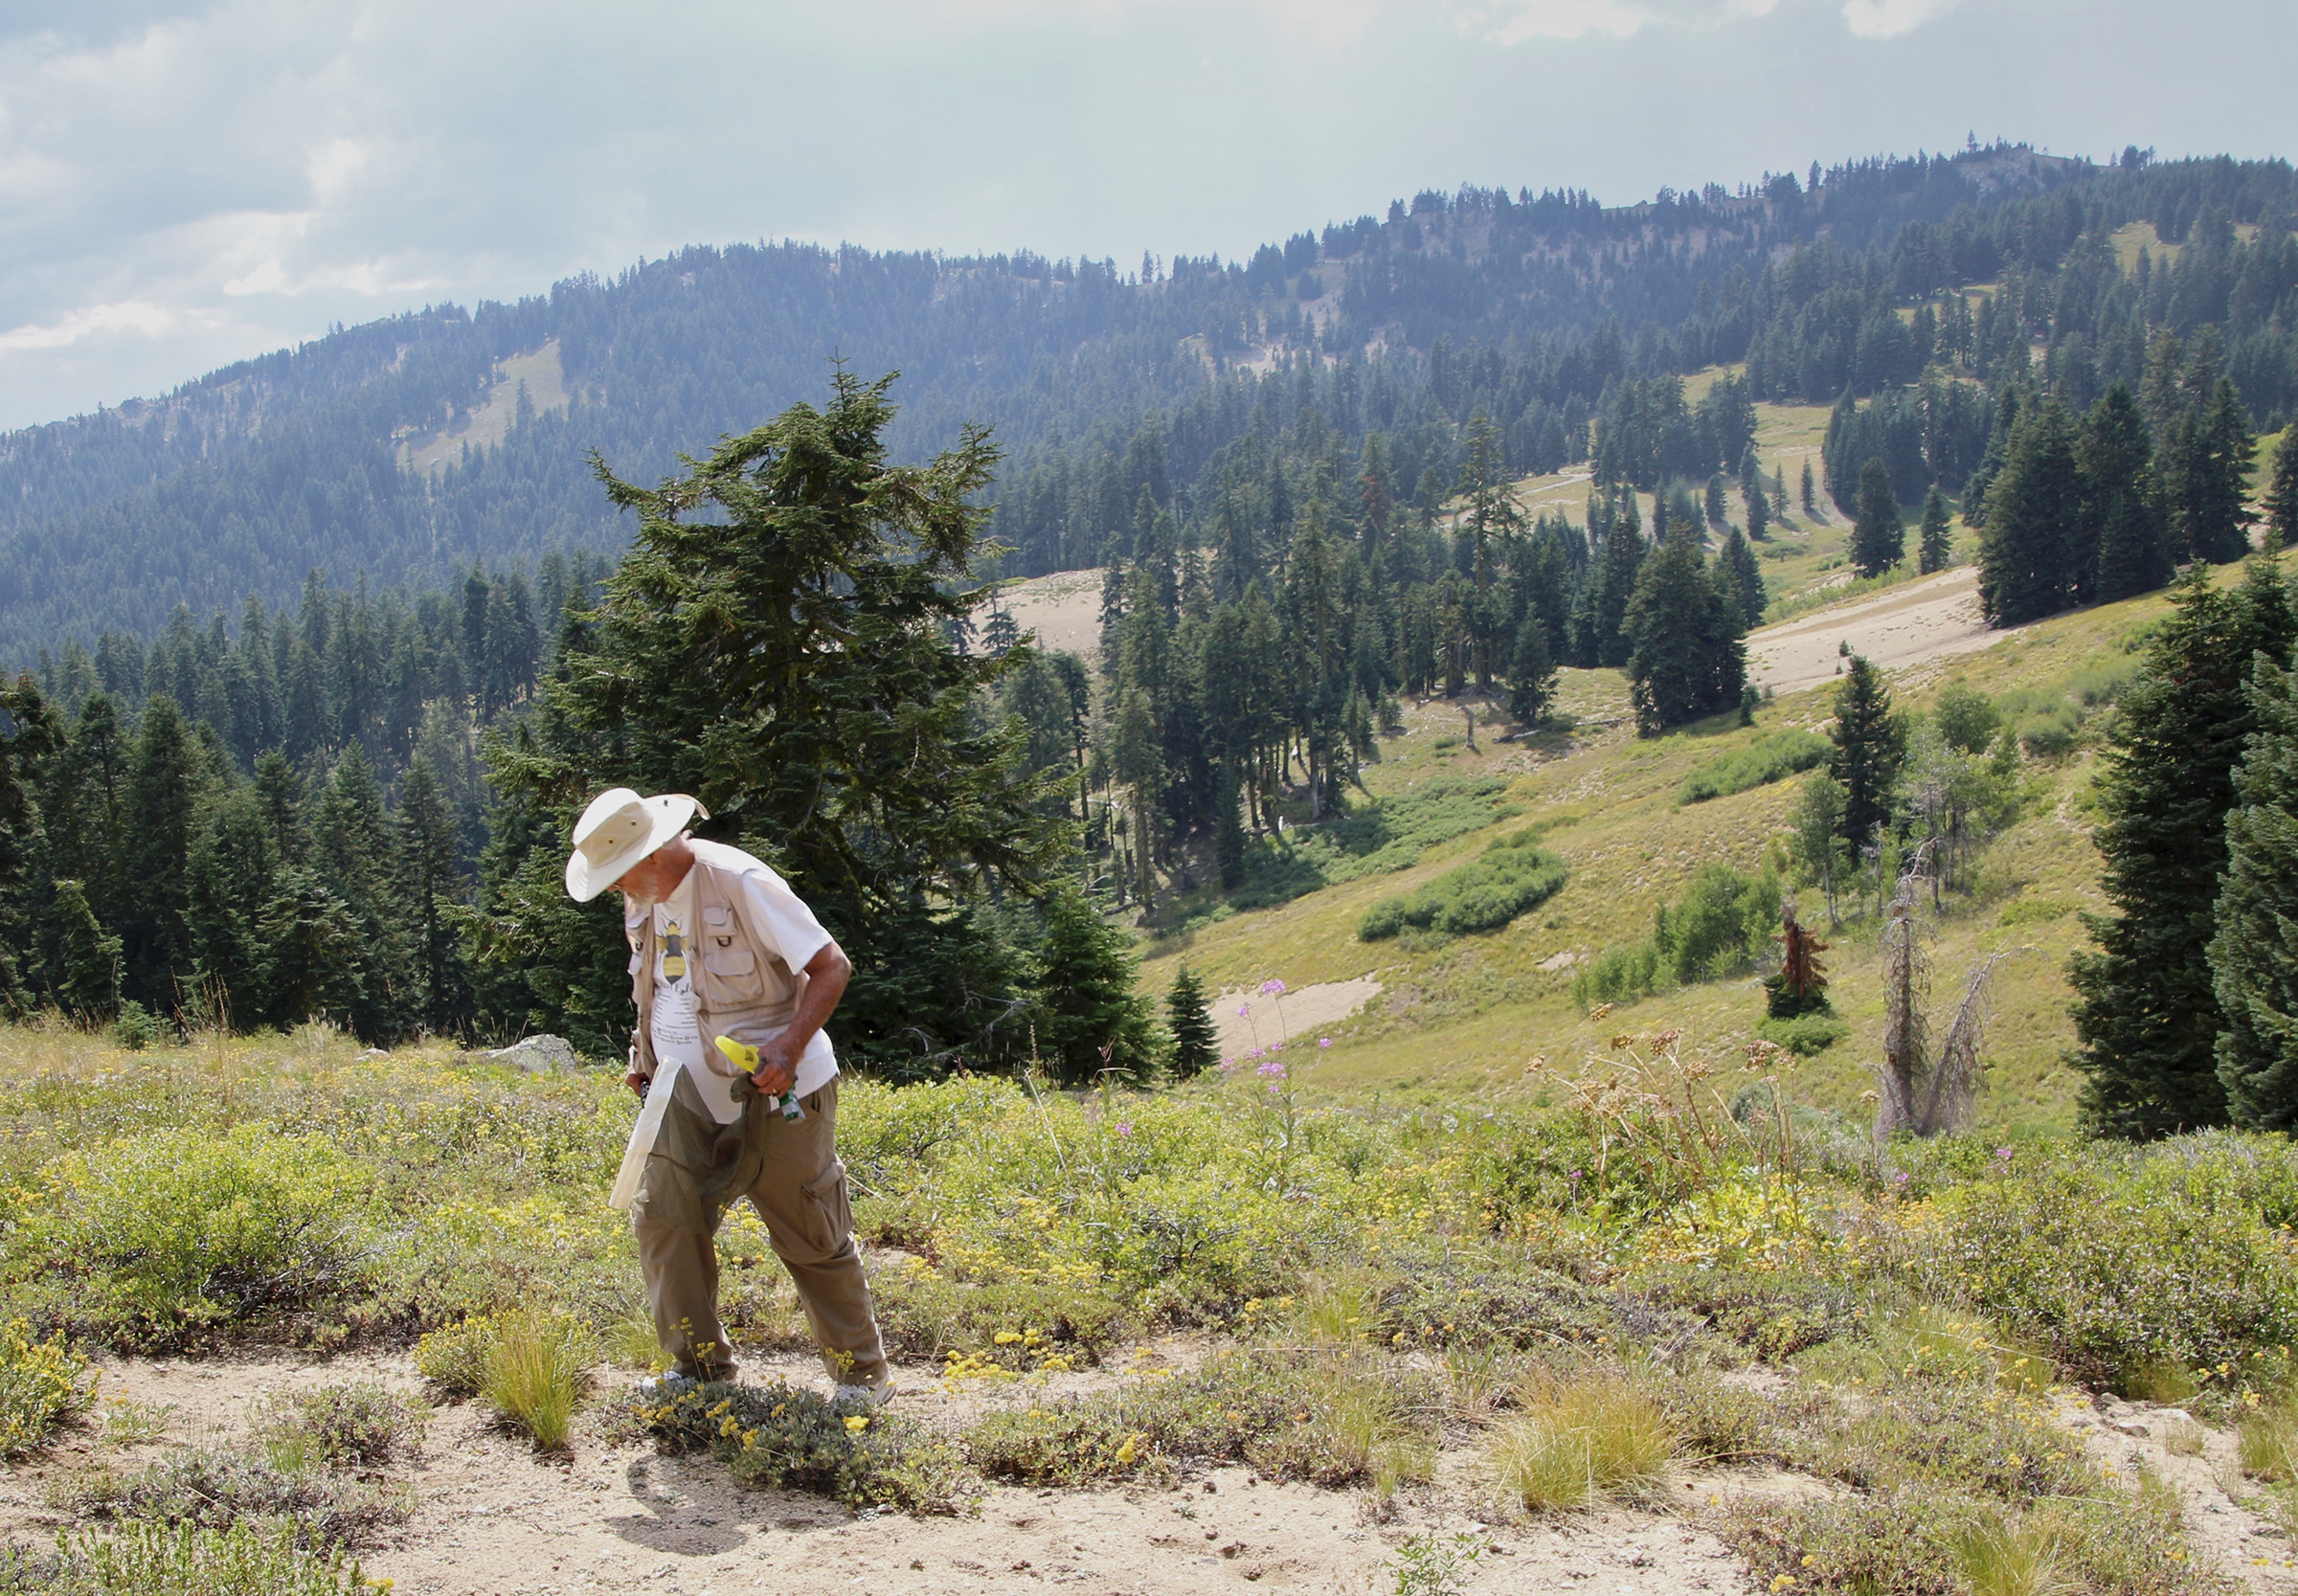 Robin Thorp hunting for Franklin’s bumble bee on Mount Ashland in Southern Oregon. (c) Paige Embry